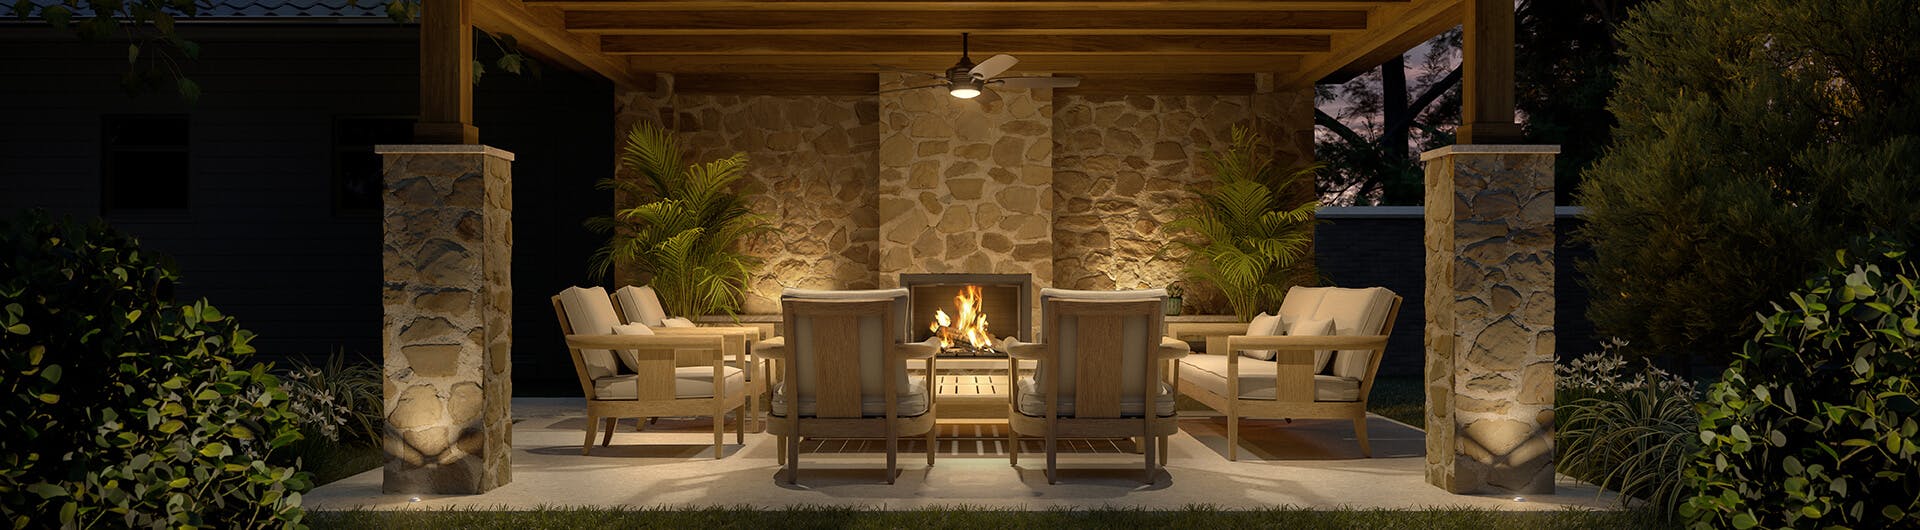 Outside patio at night with ceiling fan light and uplight along the back wall with a fireplace.